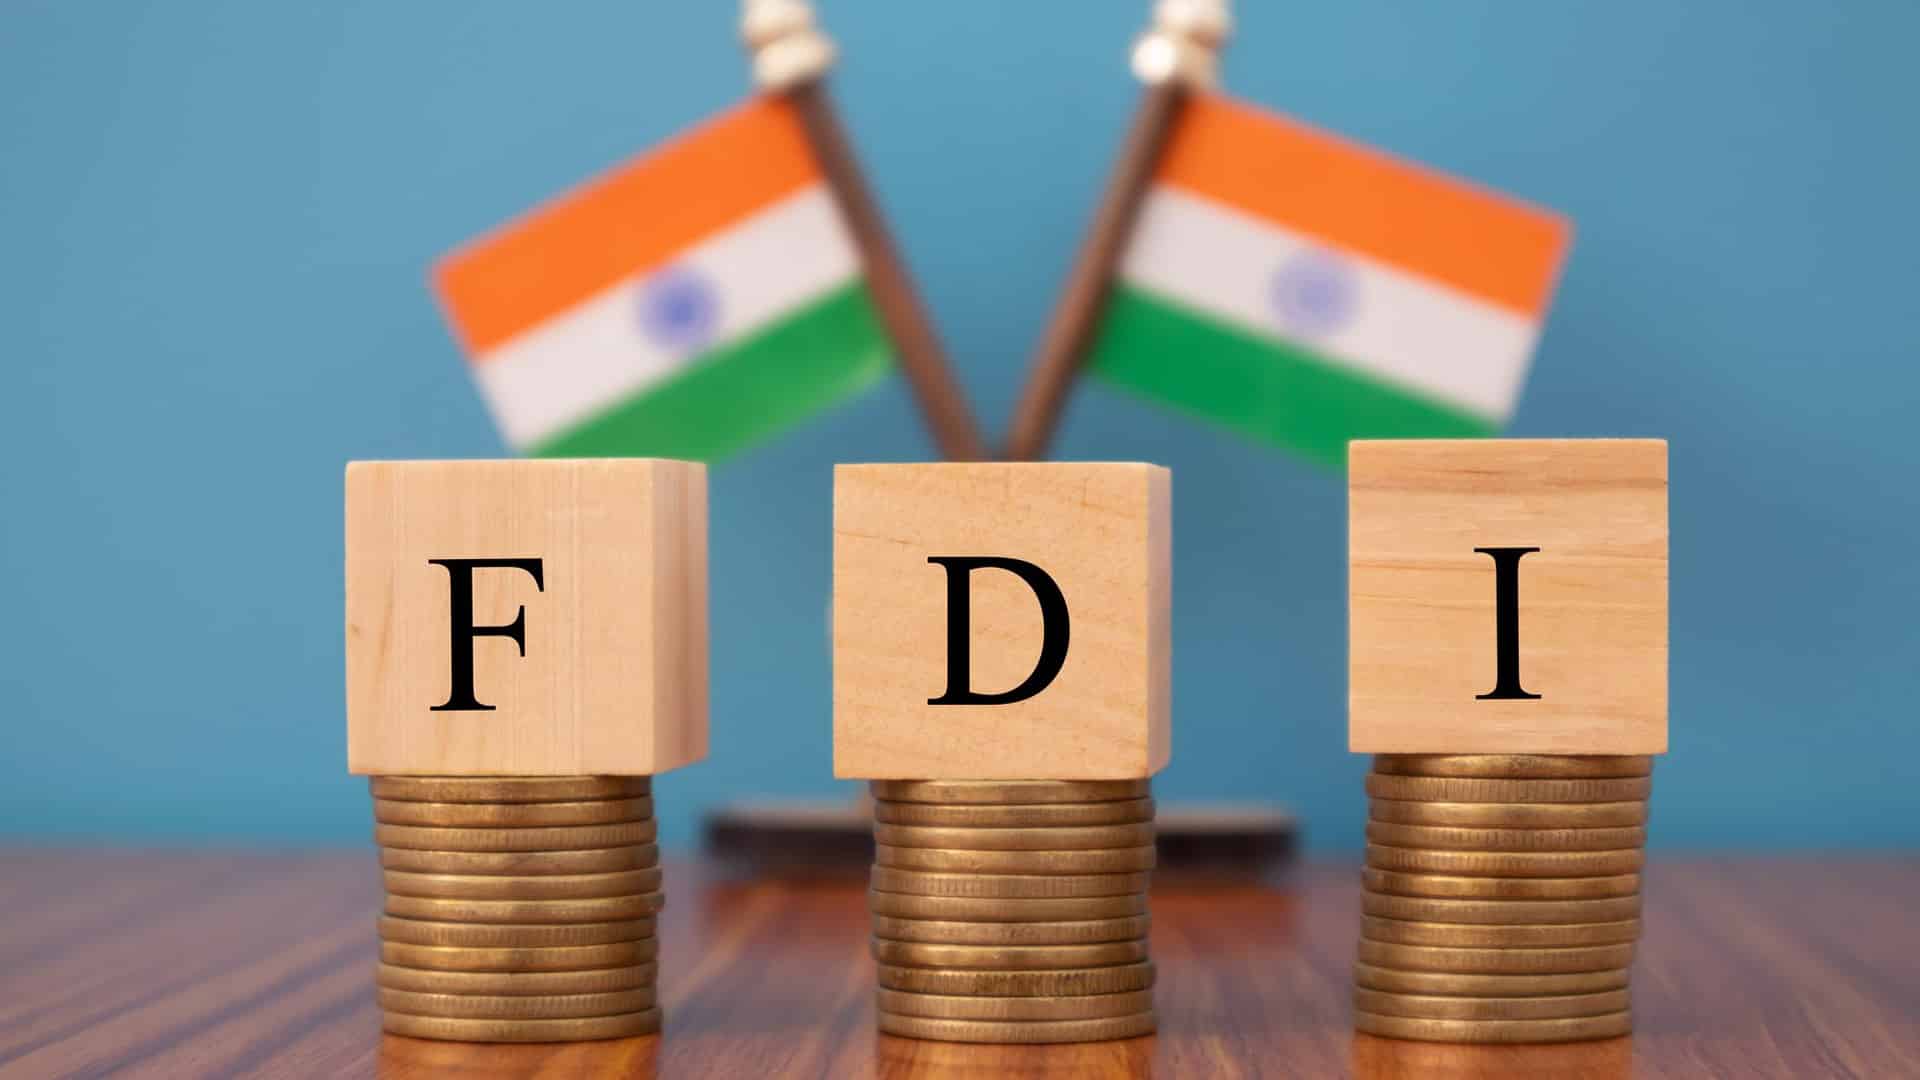 Foreign direct investments rise to $12.1 bln in May: Goyal